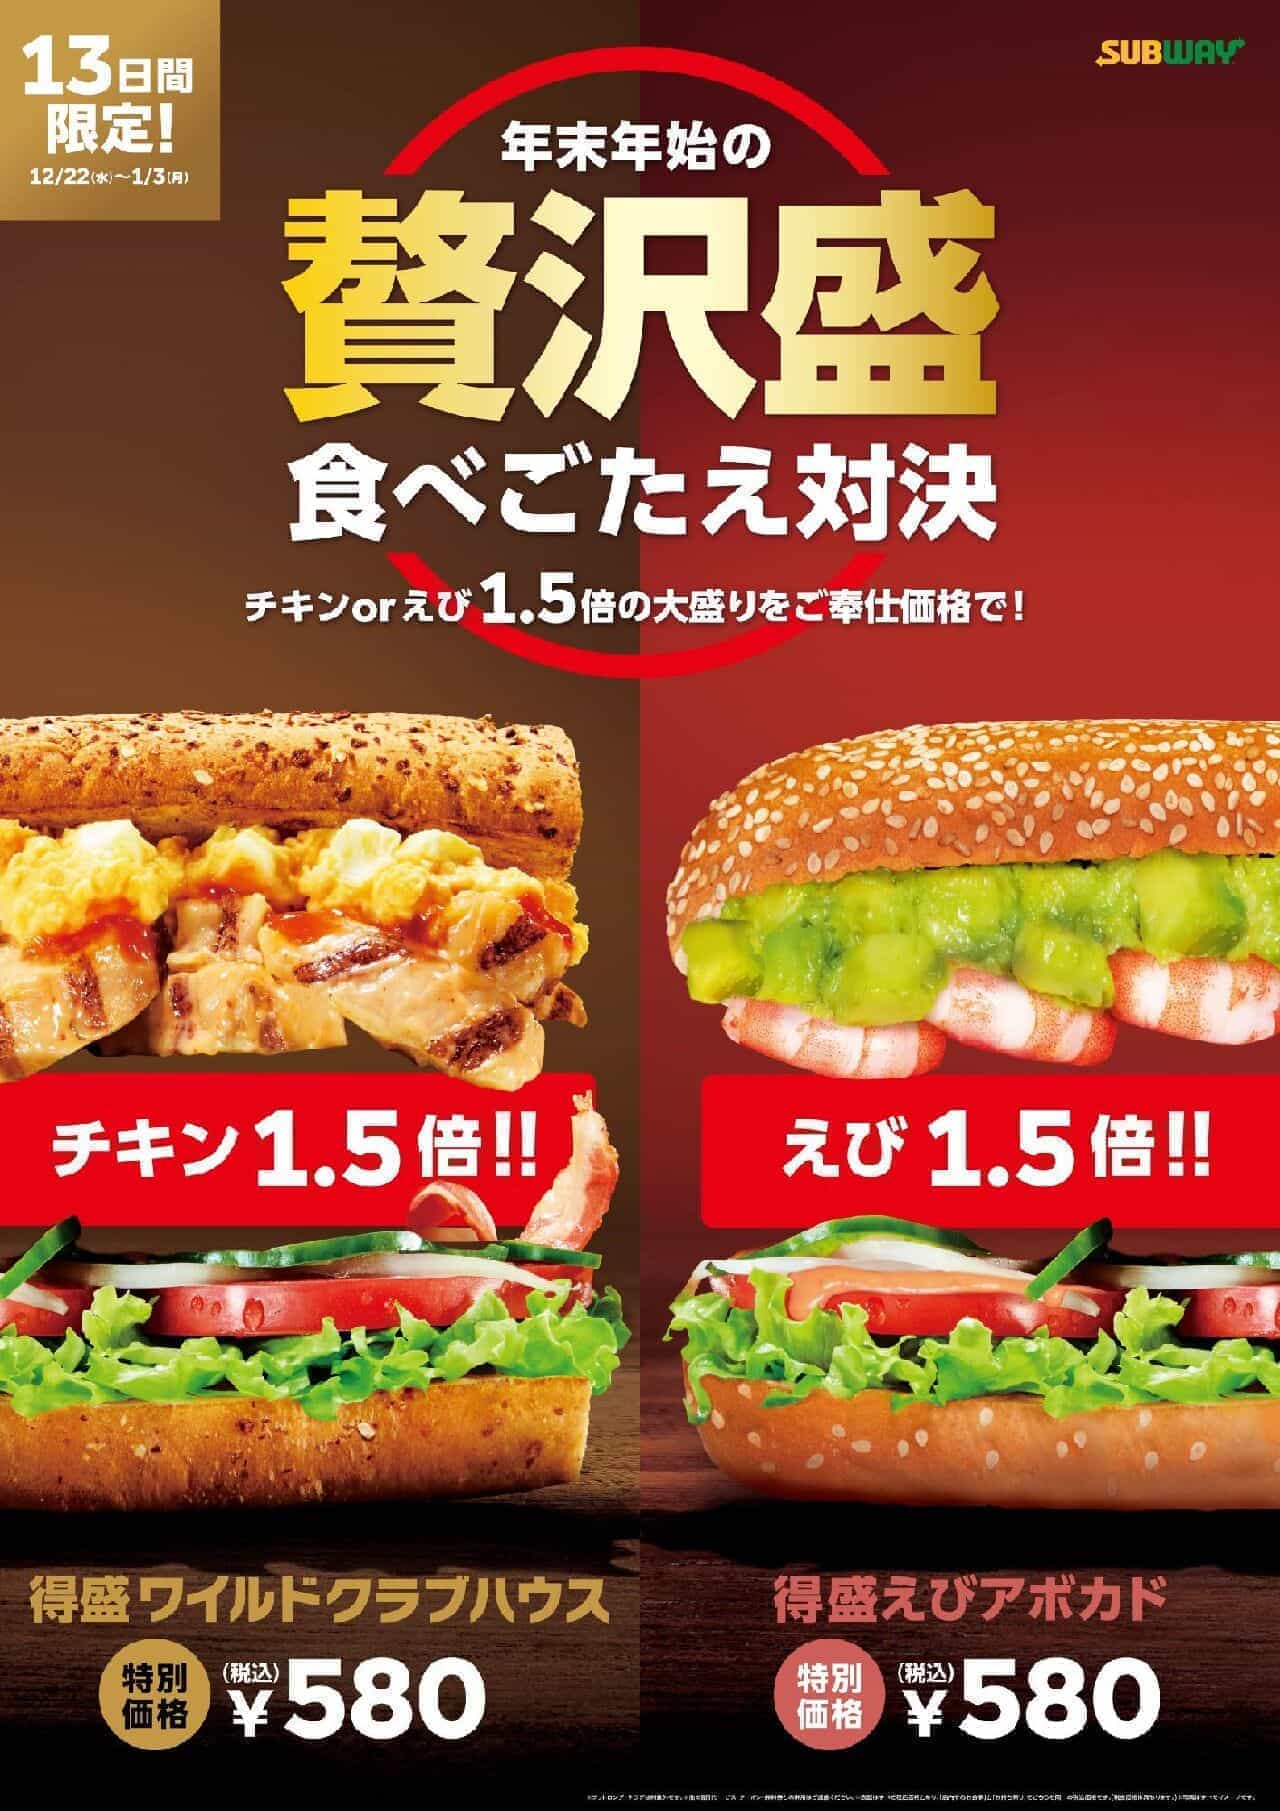 Subway "Luxury Meal Gourmet Showdown Campaign